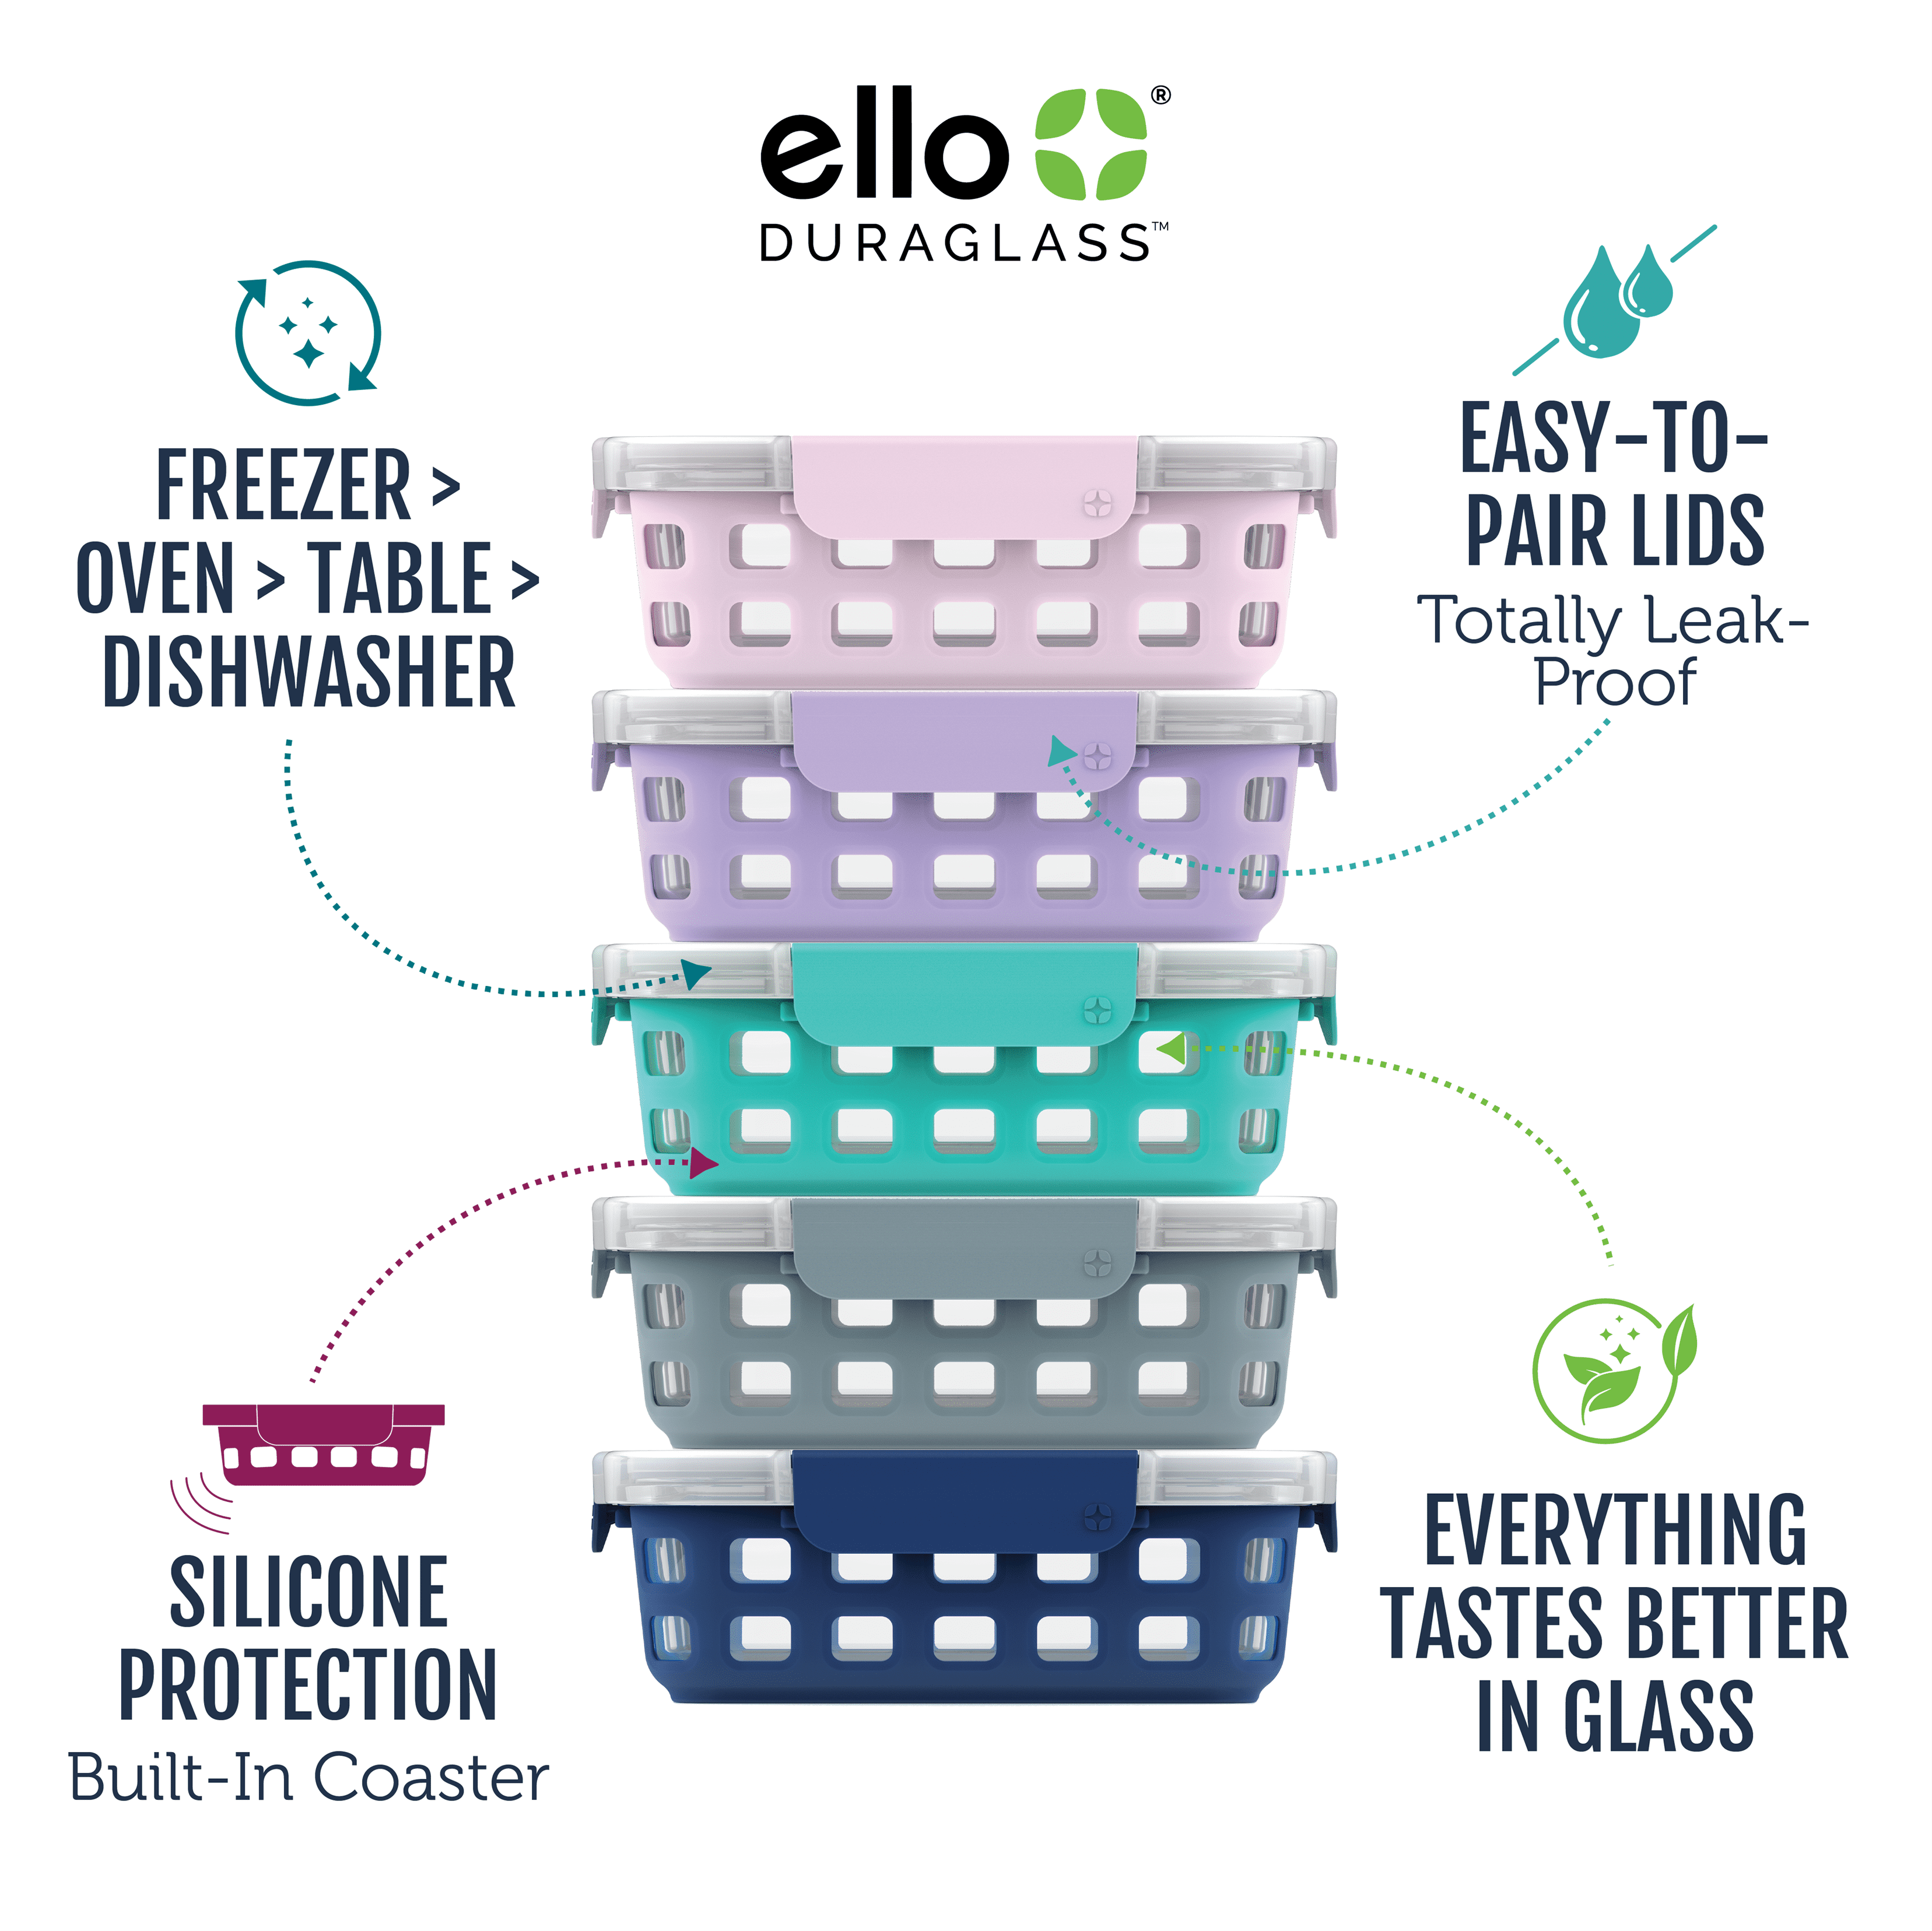 Ello 3.4 Cup Duraglass Glass Containers and Plastic Locking Lids, Set of 2